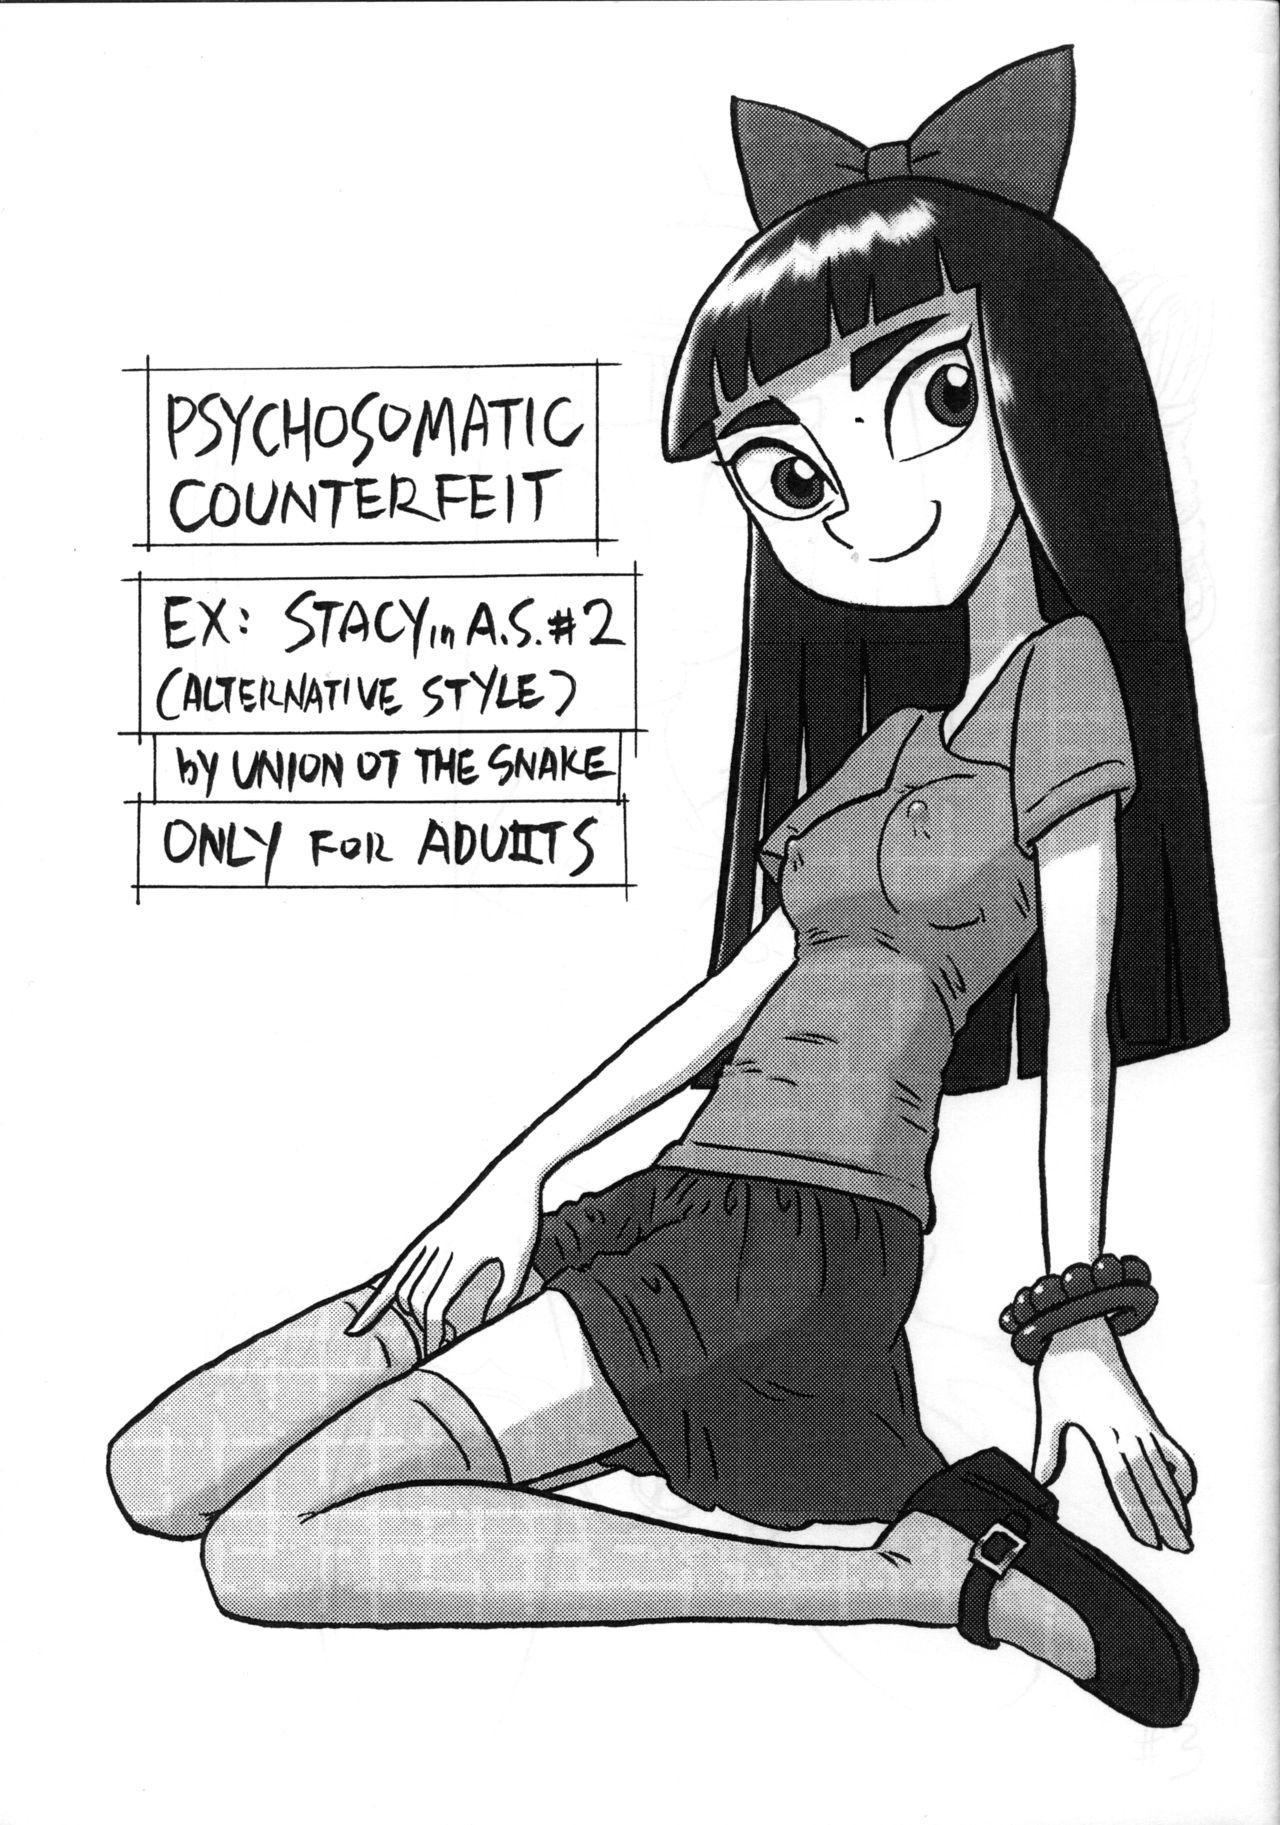 Psychosomatic Counterfeit Ex: Stacy in A.S. #2 0